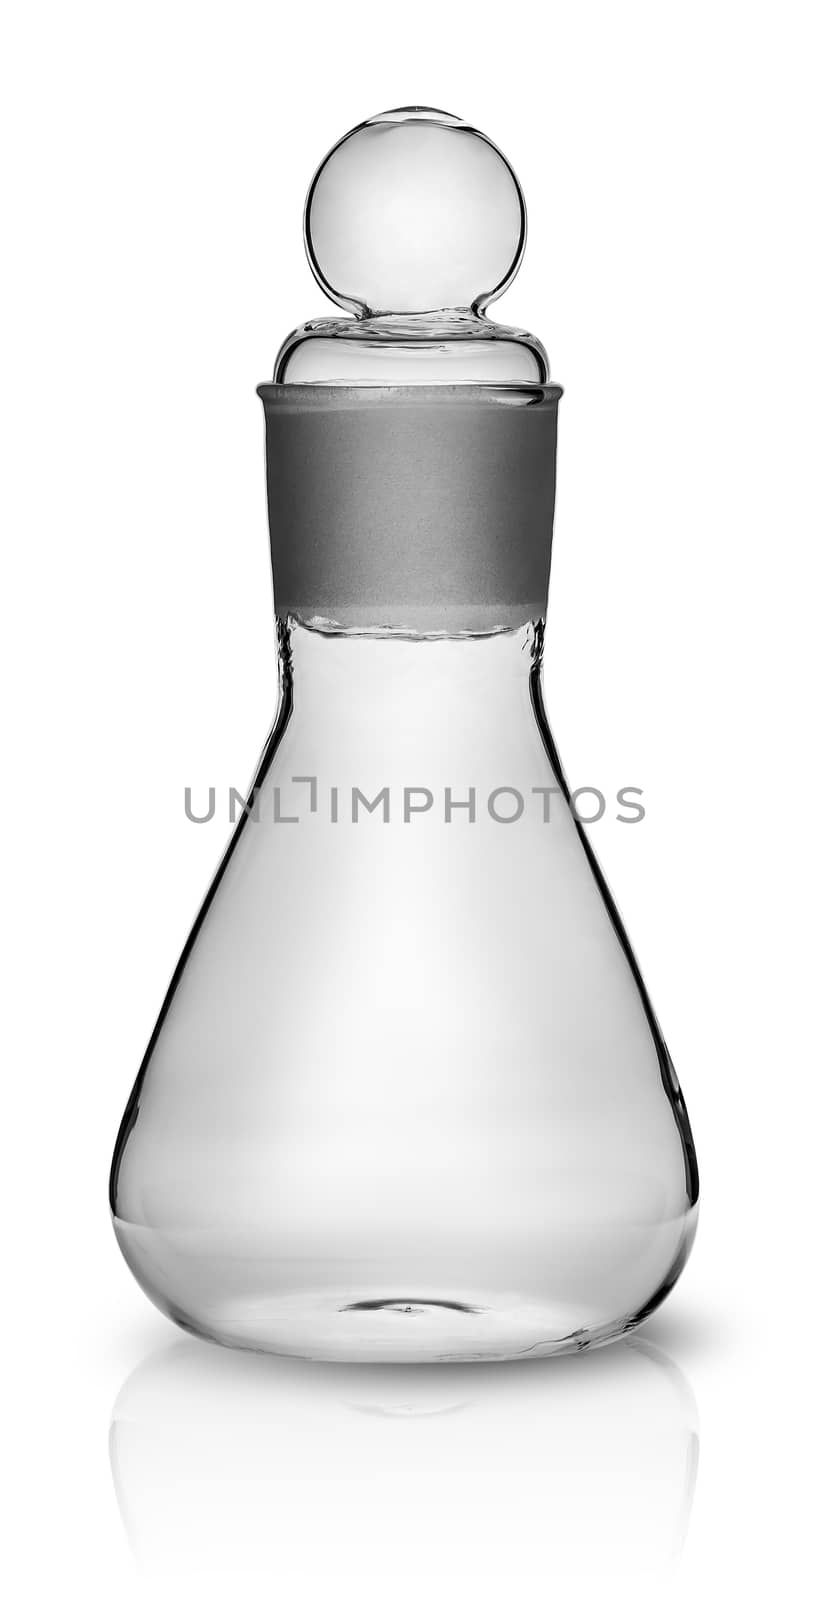 Old laboratory flask with ground glass stopper isolated on white background